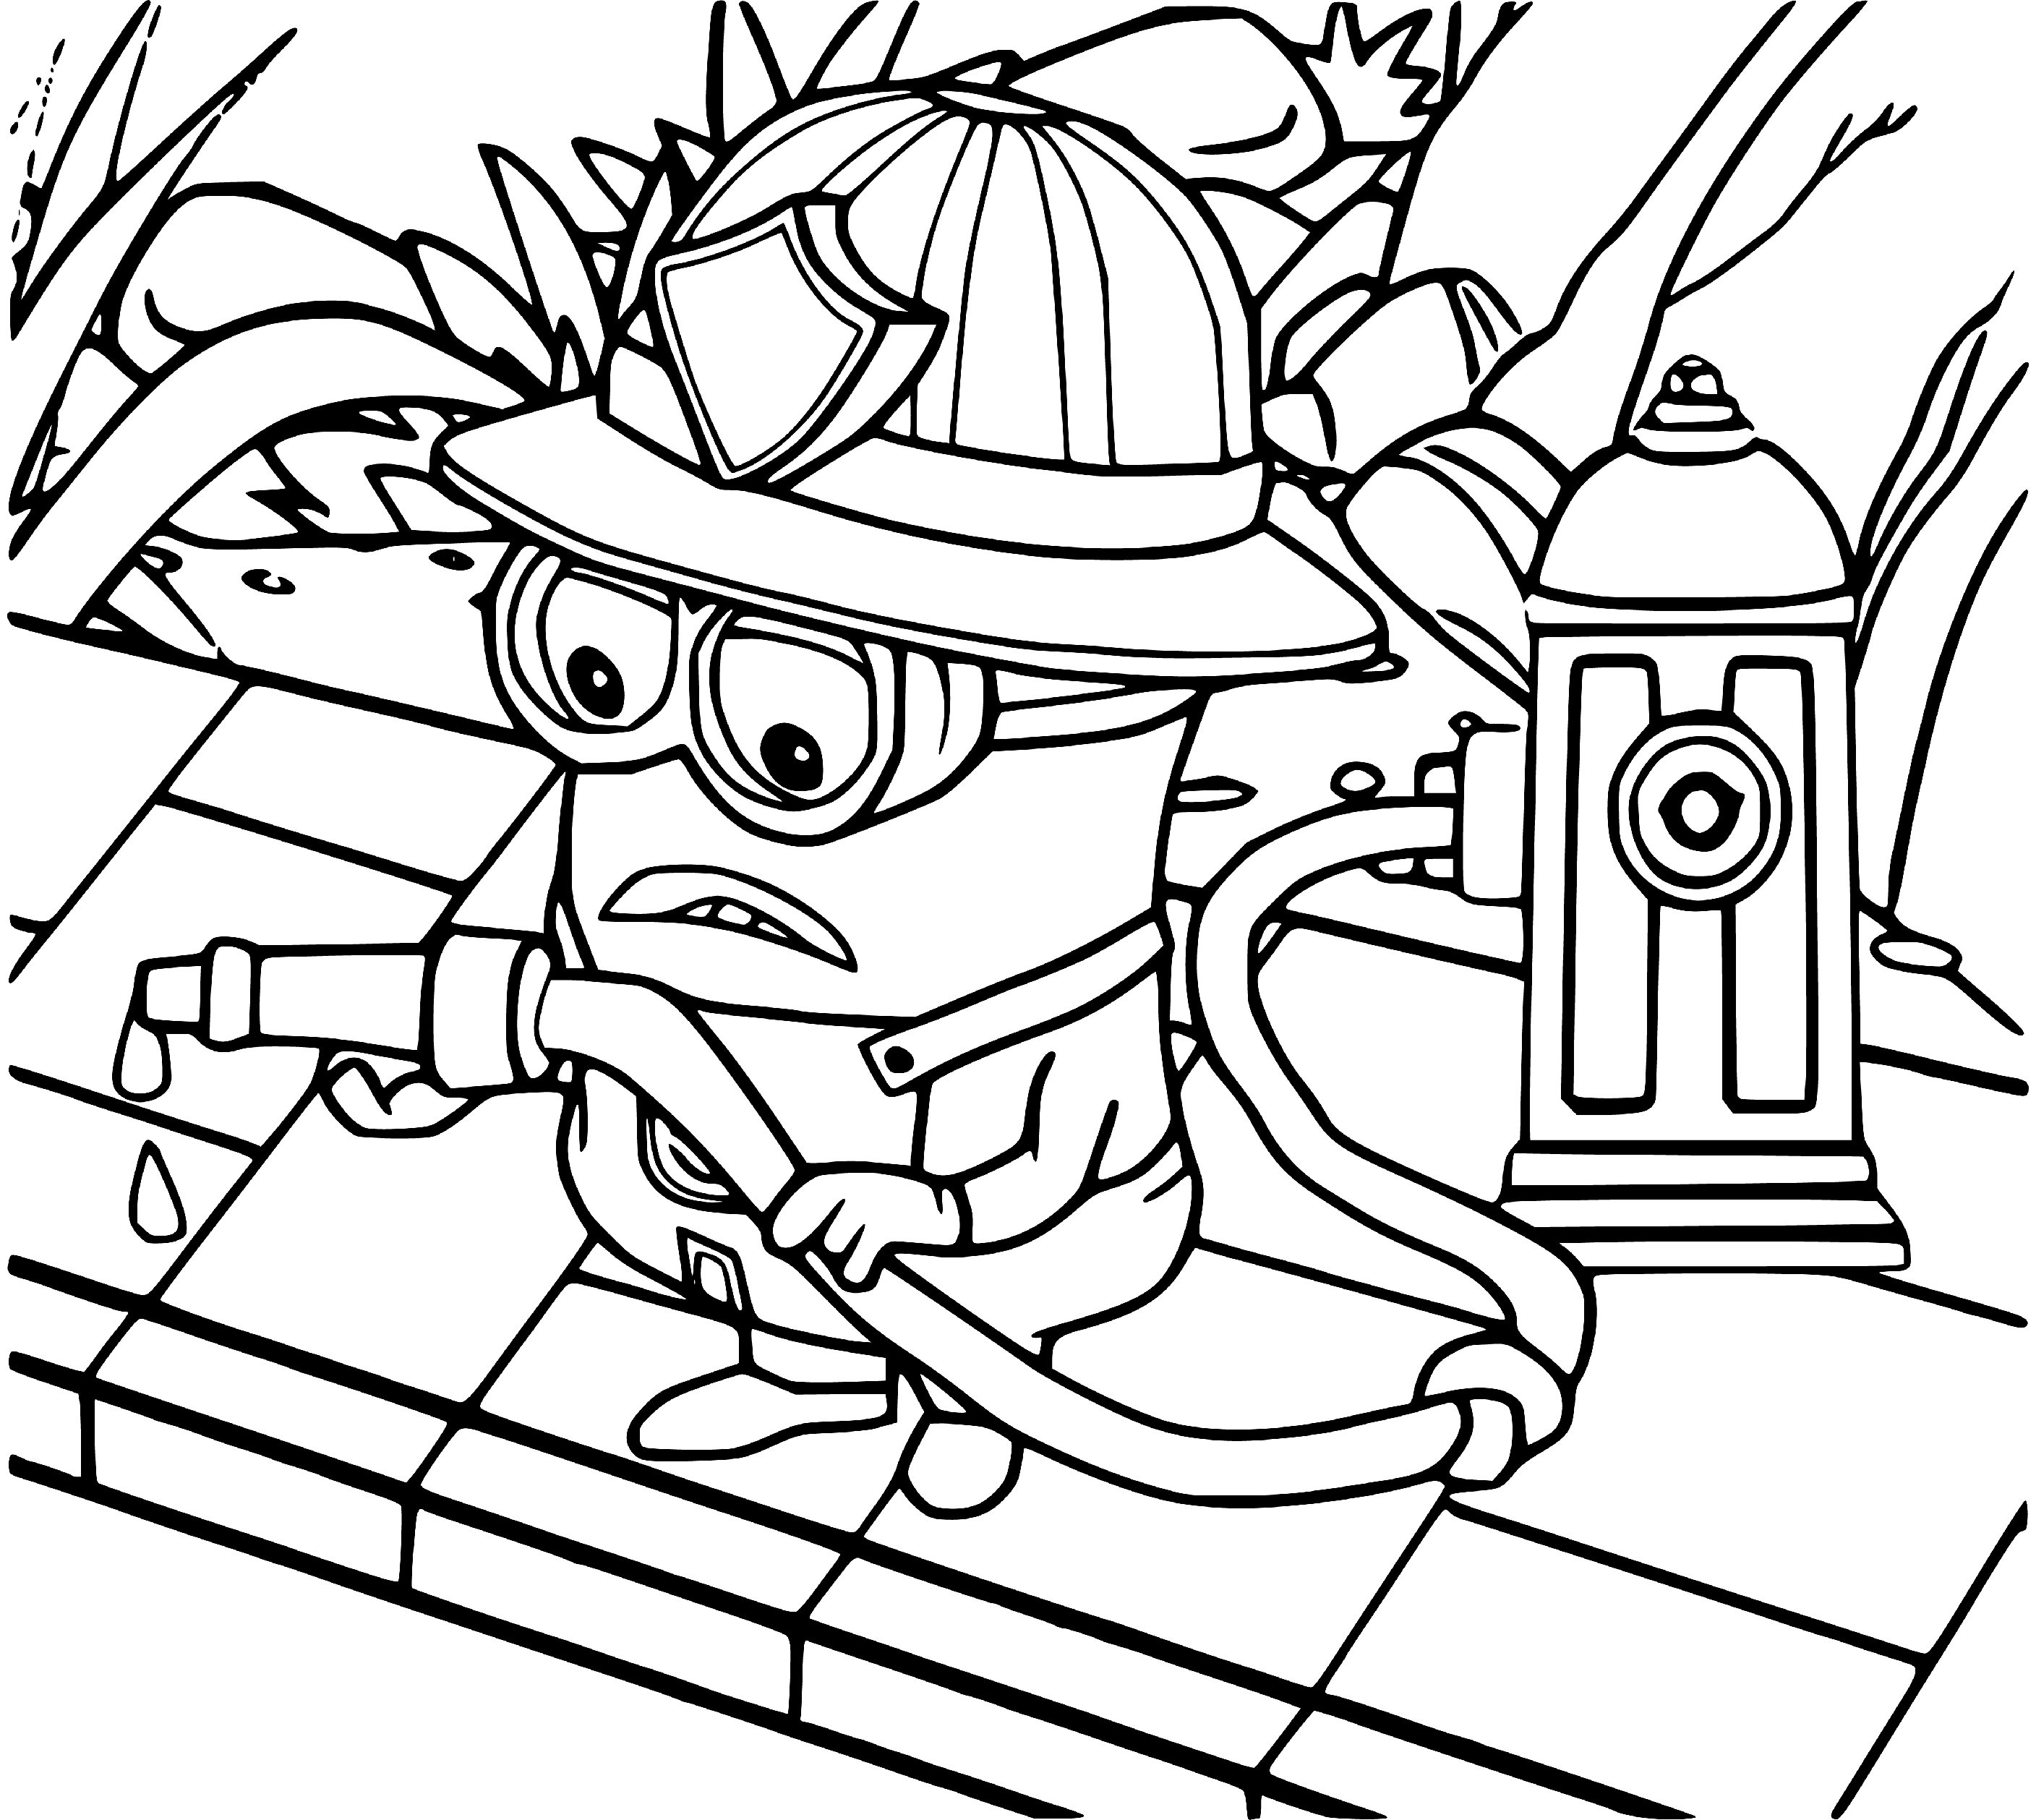 Minion as Firefighter Coloring Pages - SheetalColor.com